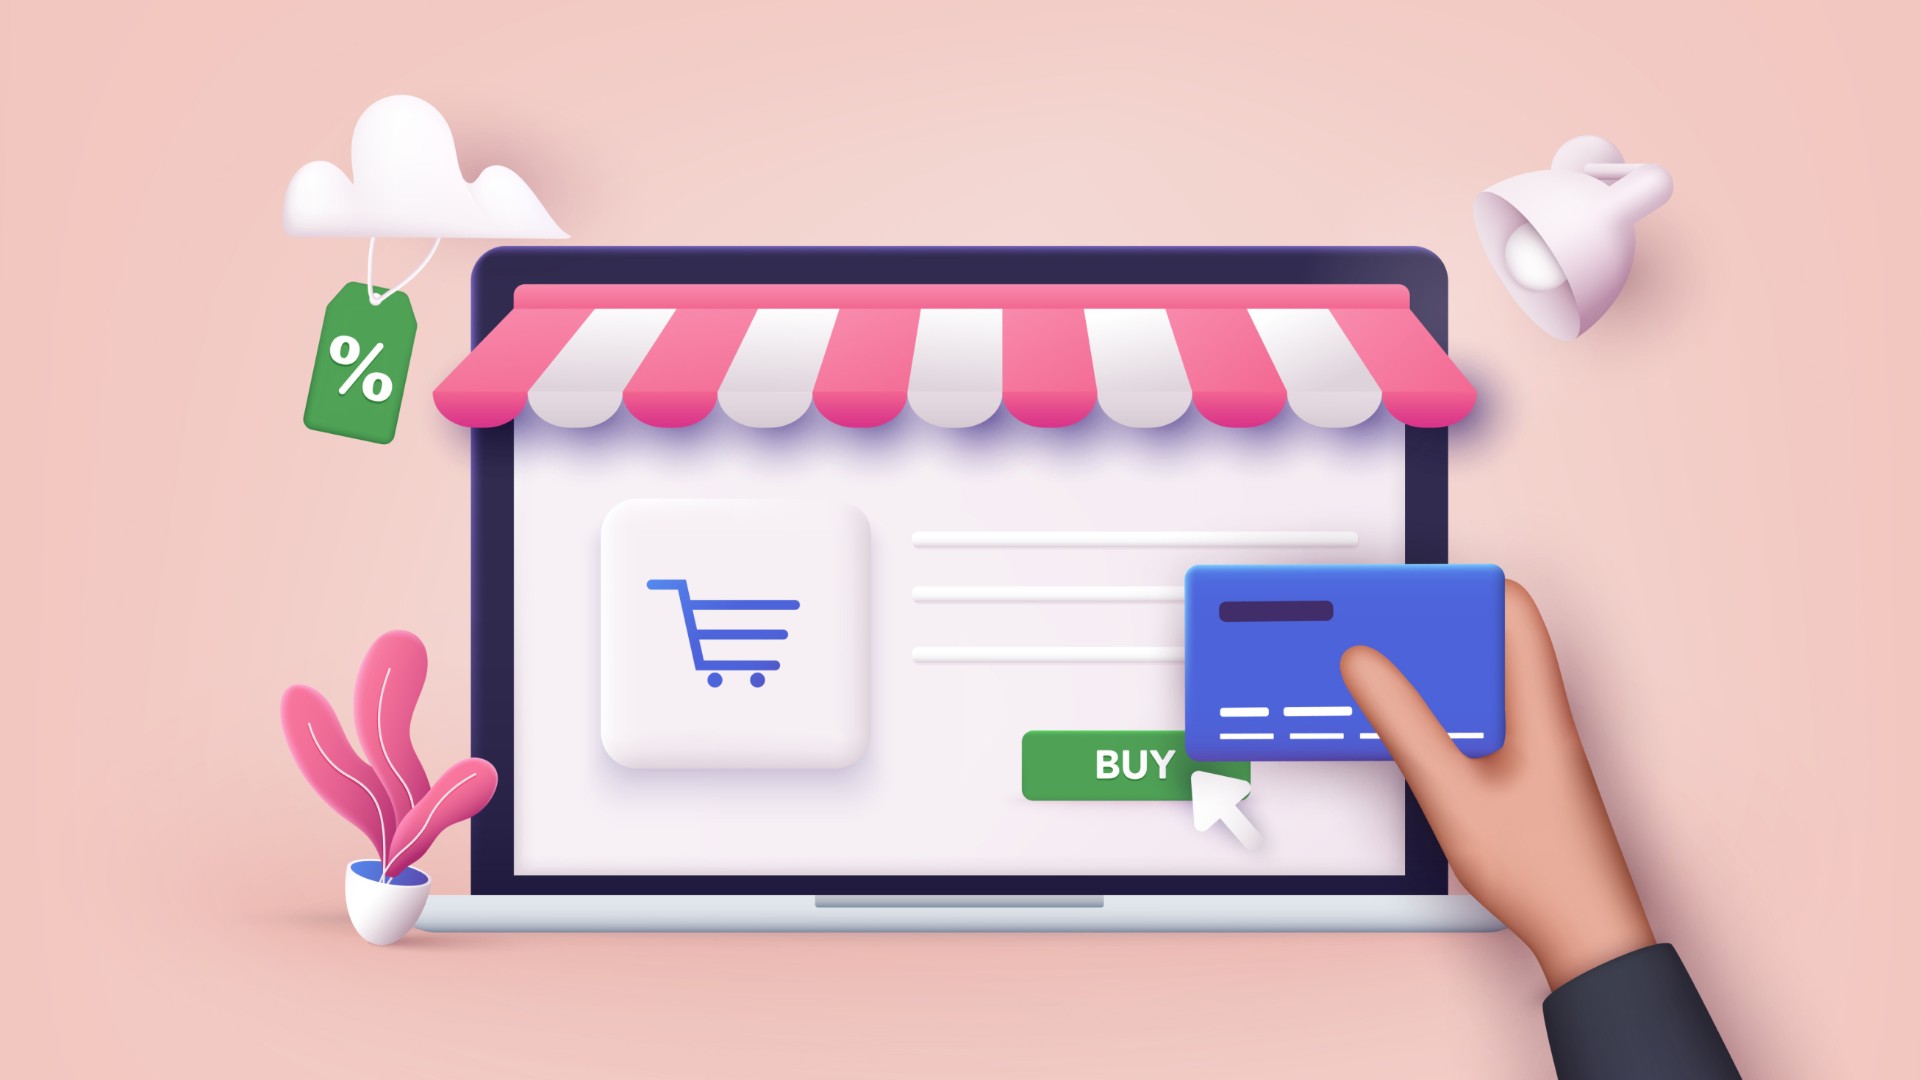 Discover the top 10 tips to achieve a smooth user experience on marketplaces